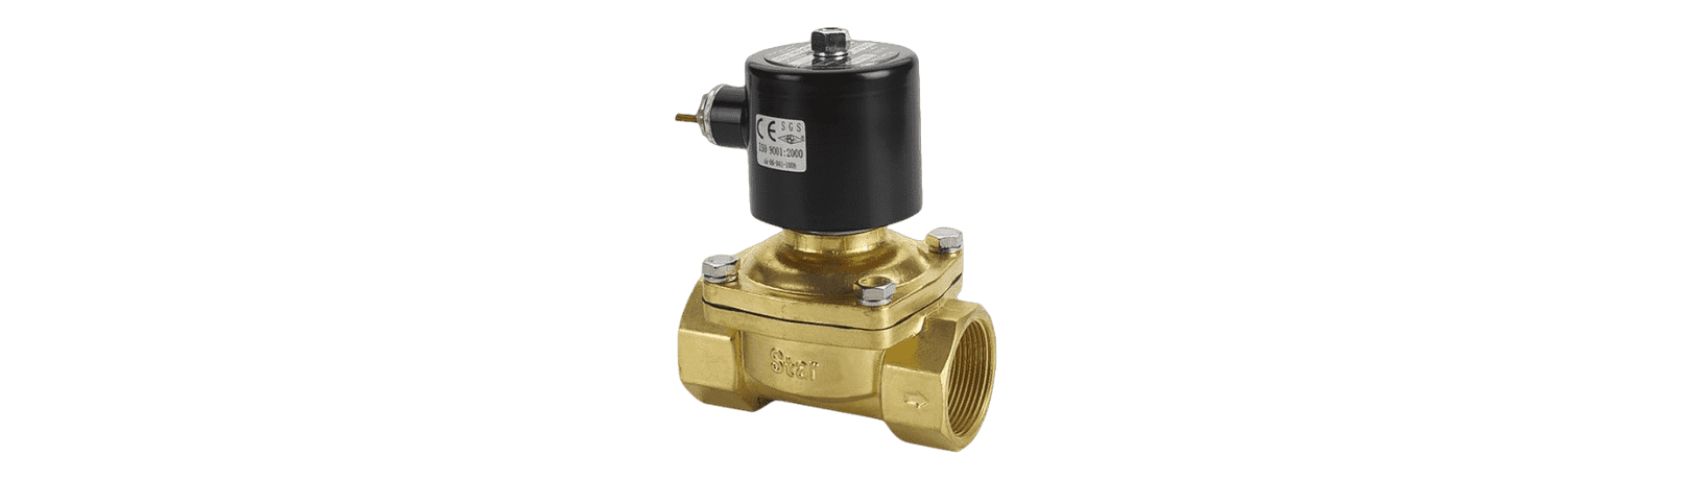 What Is Solenoid Valve And How Does It Work?